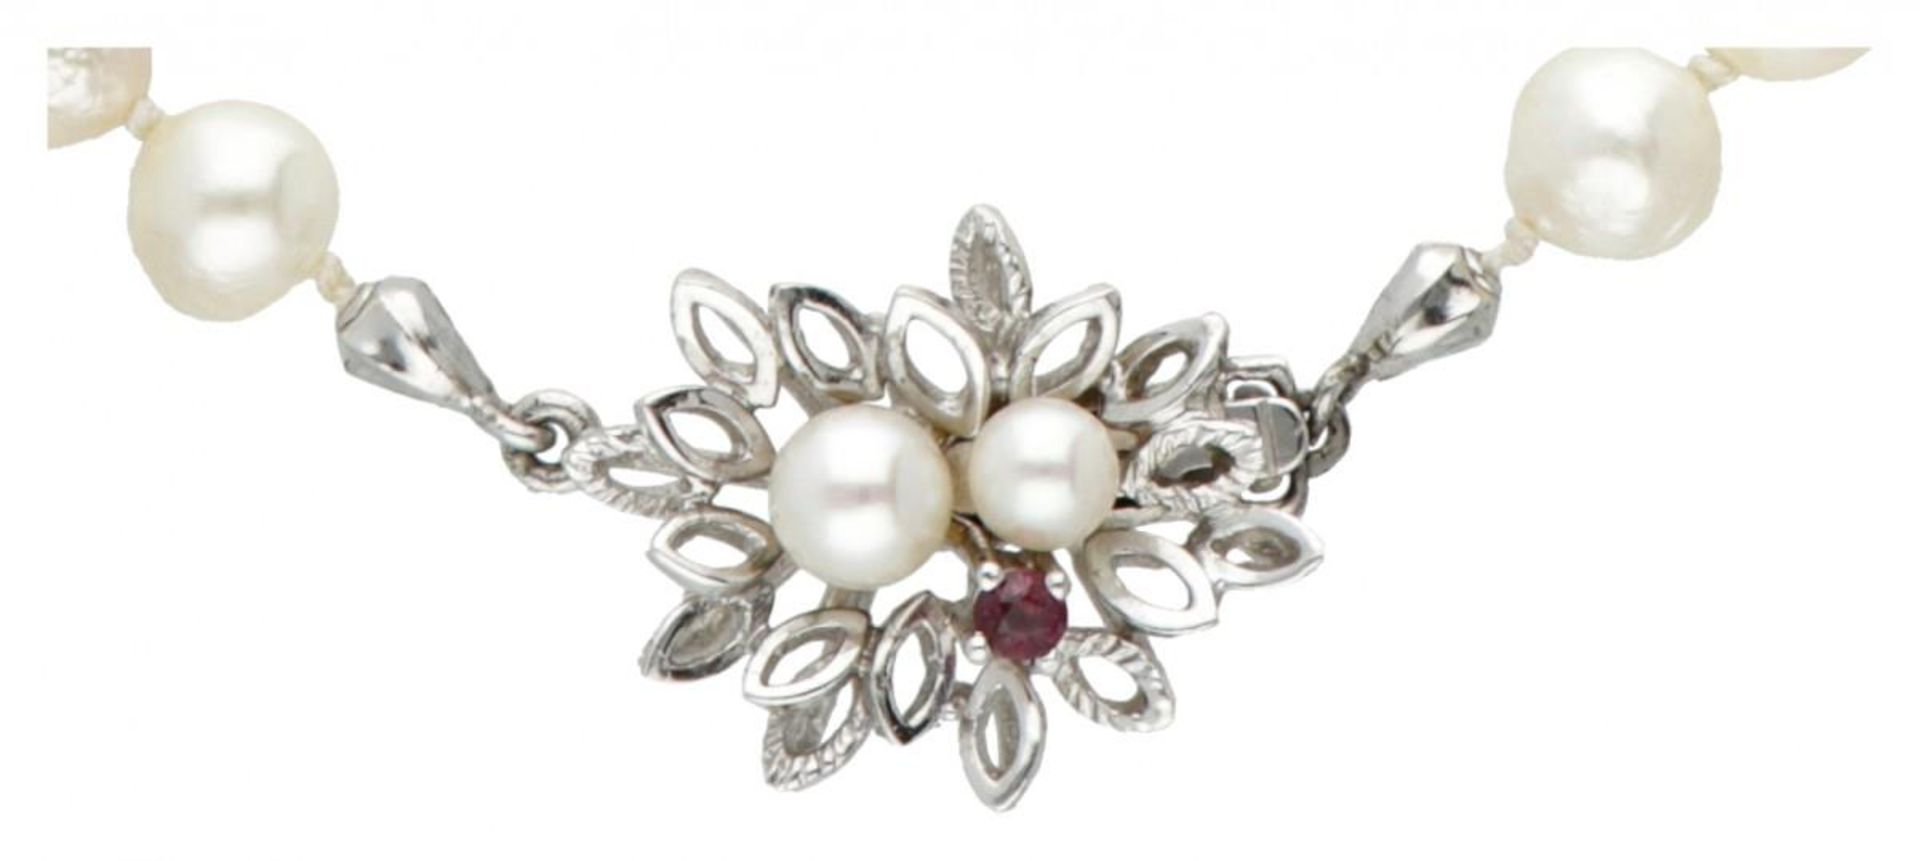 Single strand pearl necklace with a 14K. white gold closure set with pearl and ruby. - Image 2 of 3